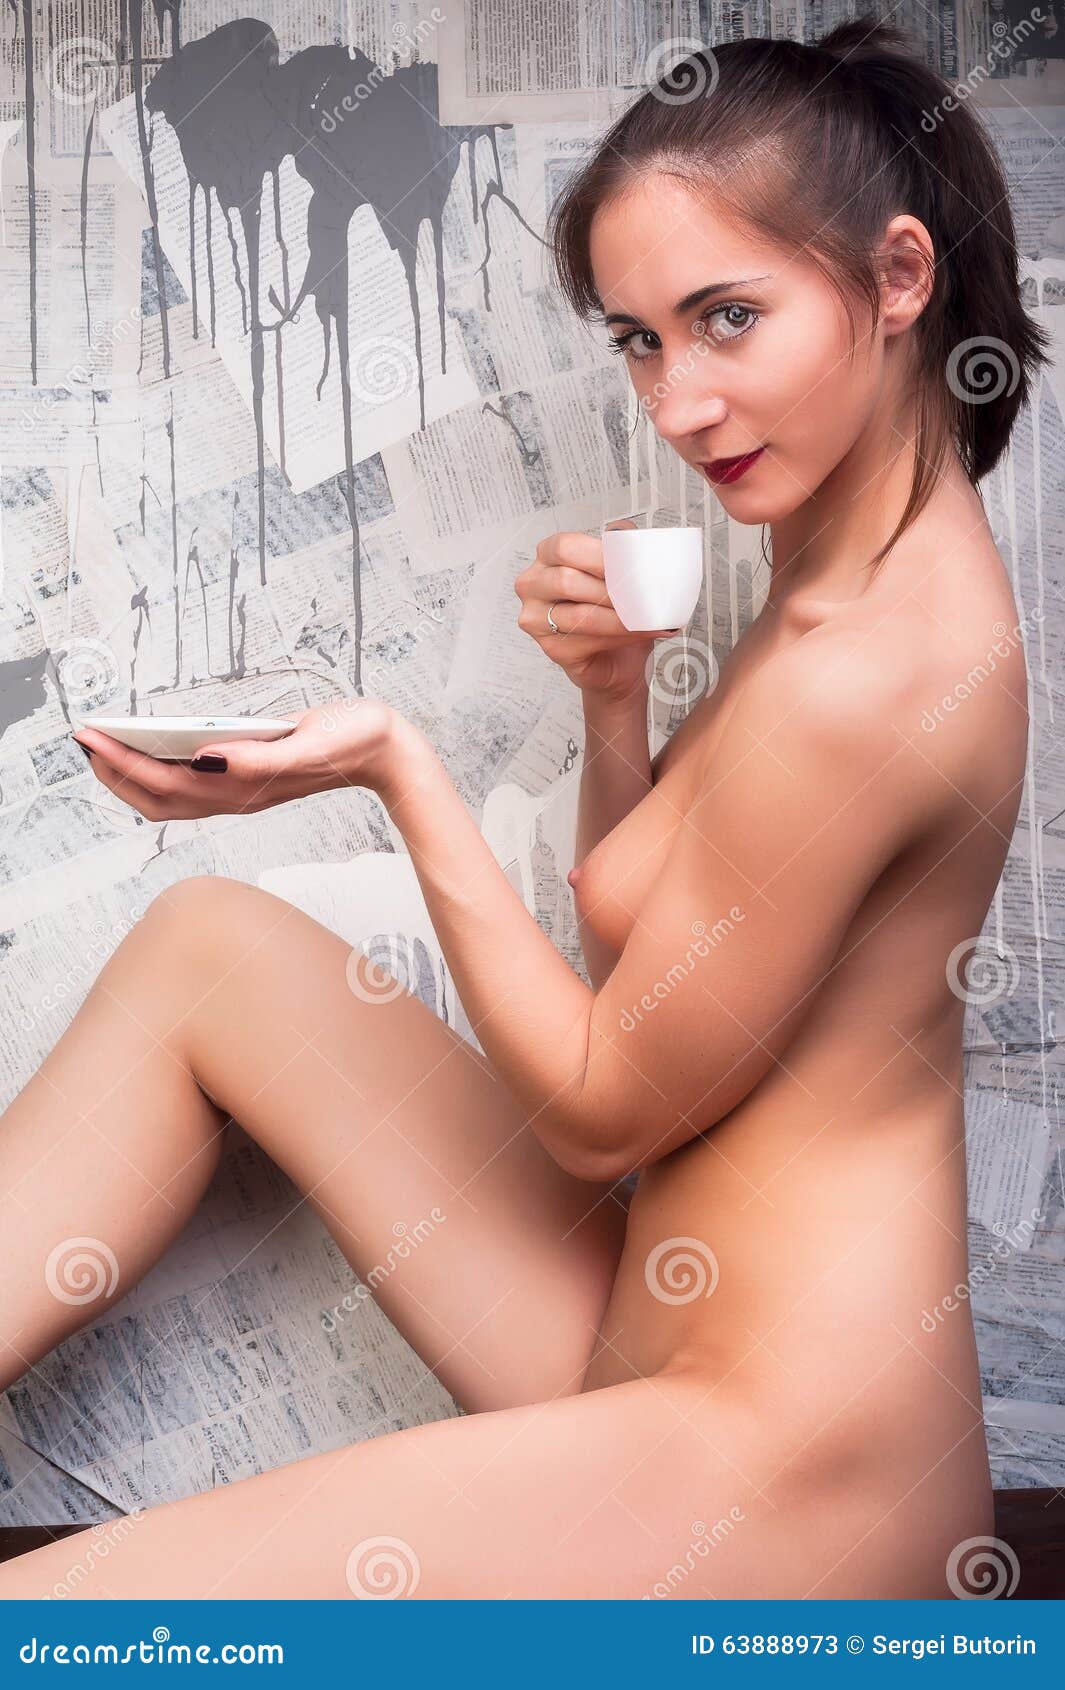 Naked woman drinking coffee